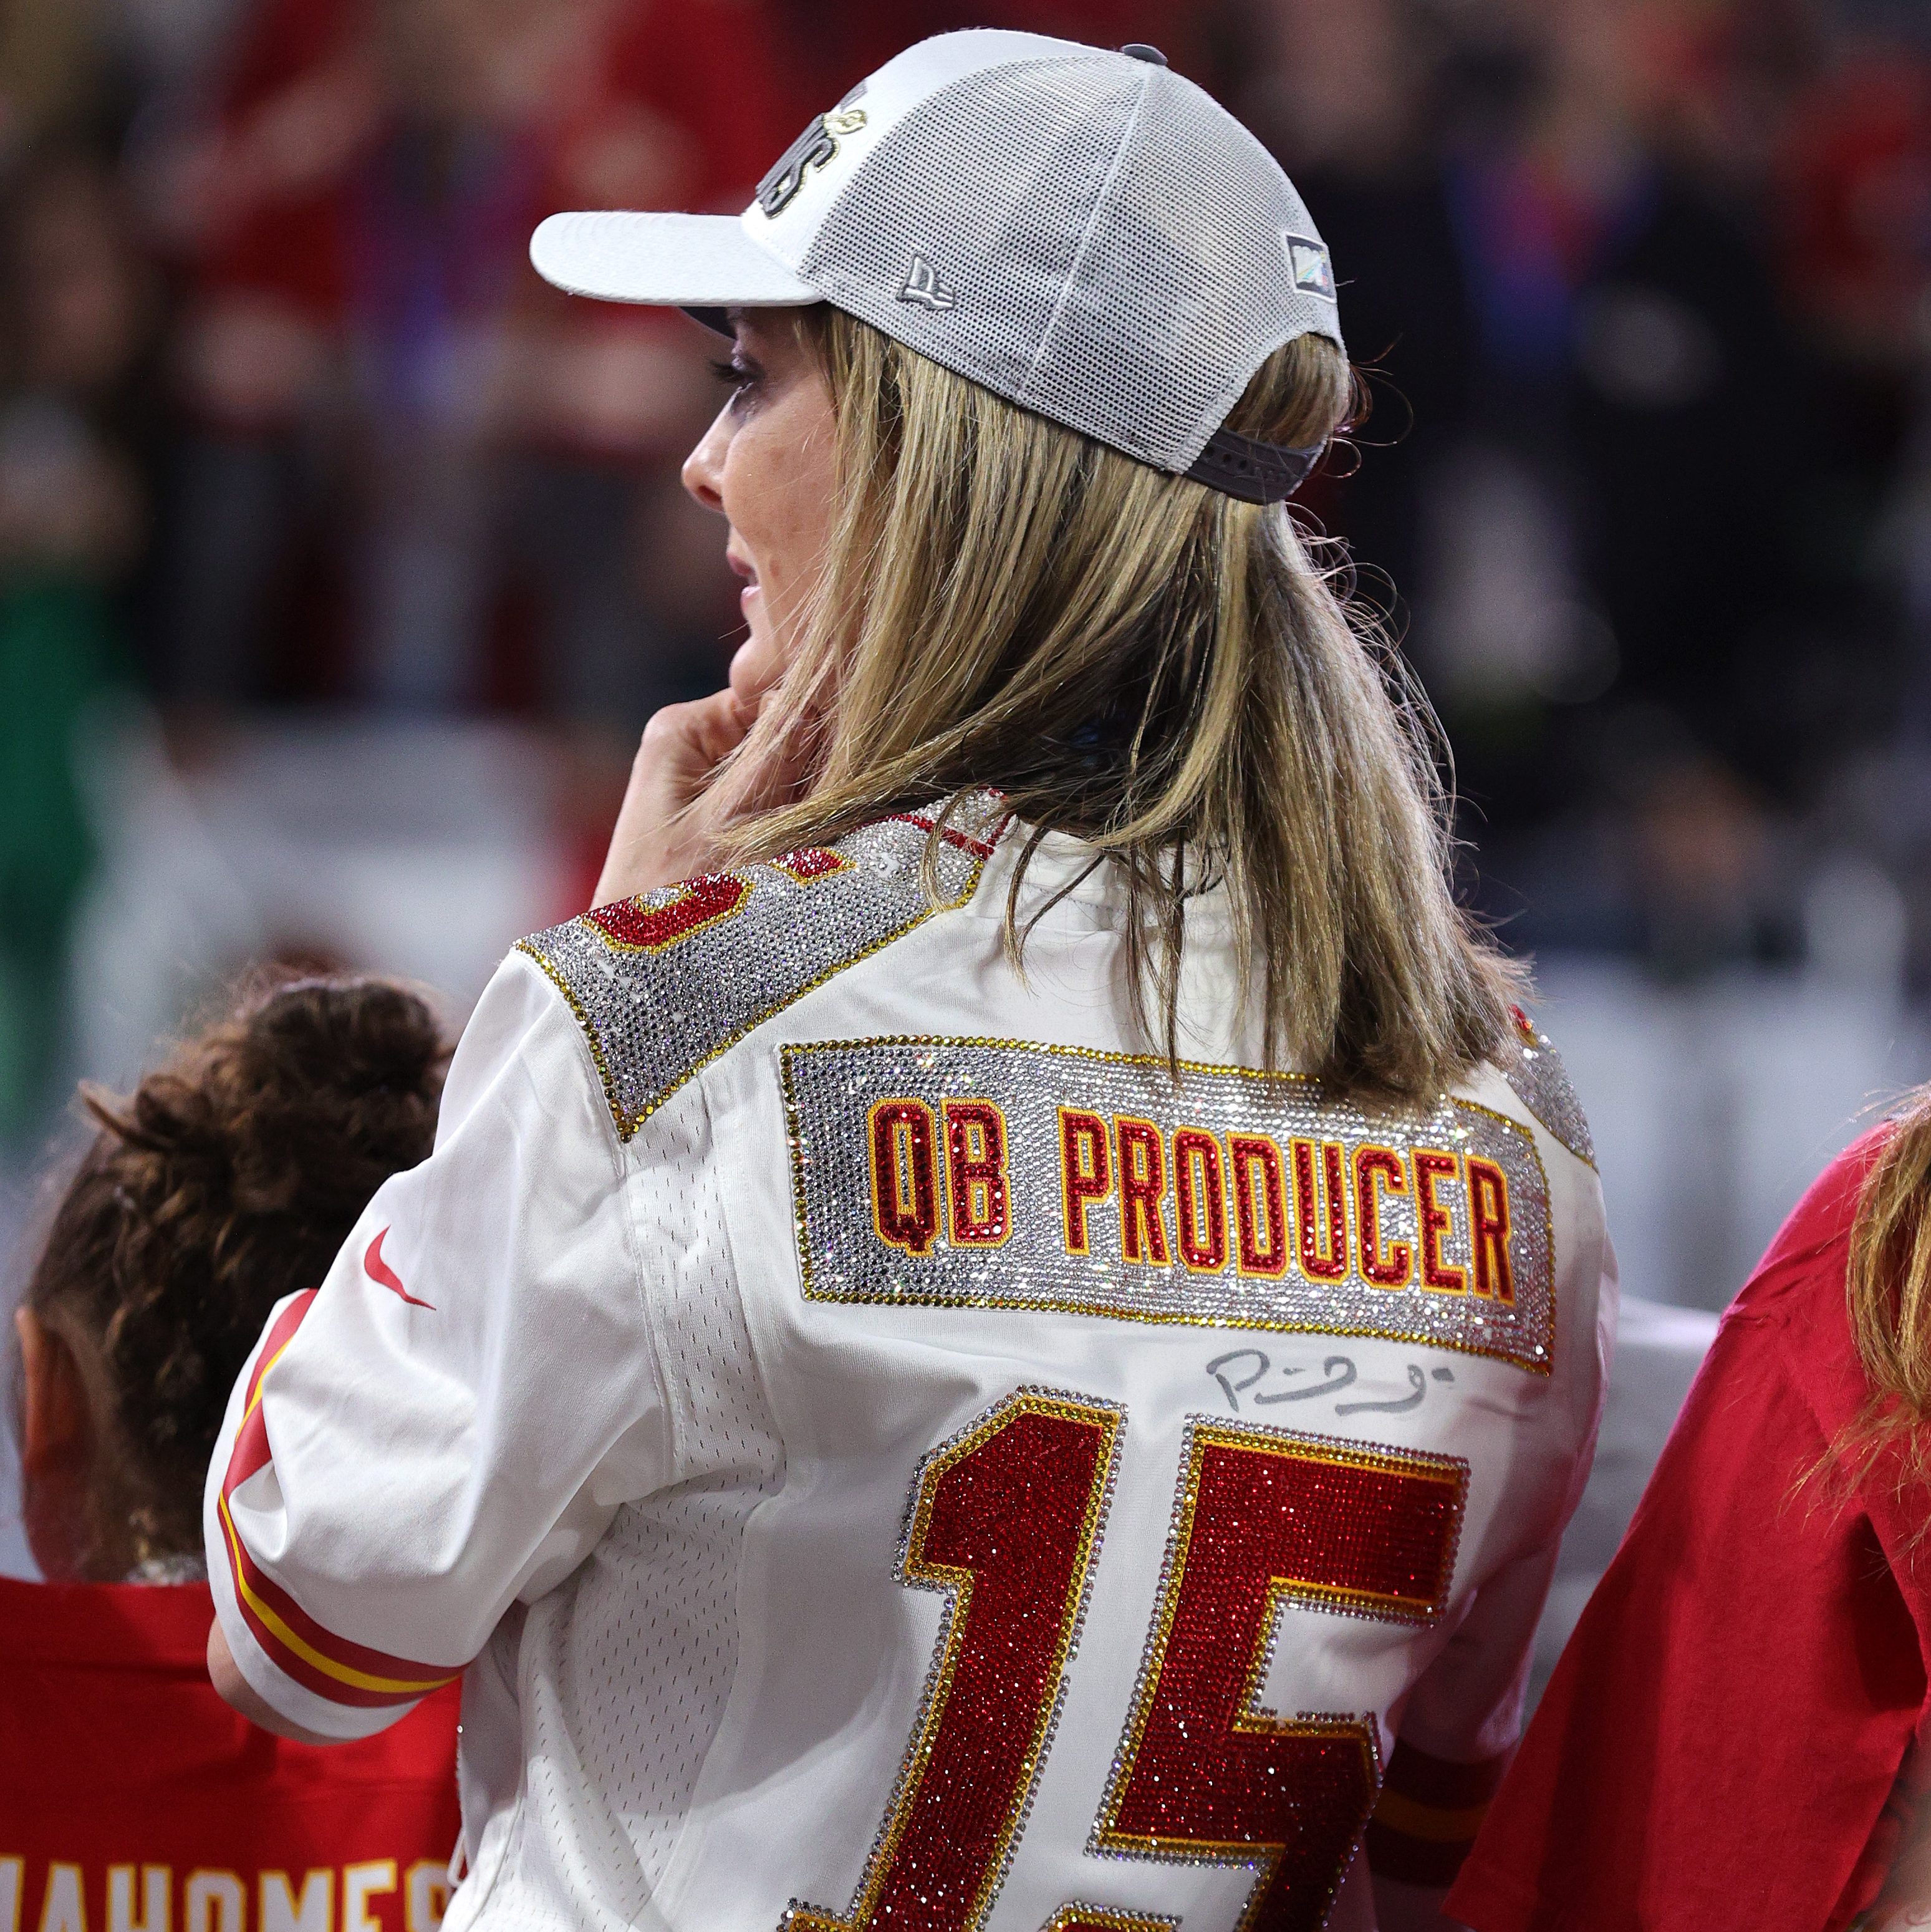 Randi Mahomes in her "QB Producer" jersey, 2020